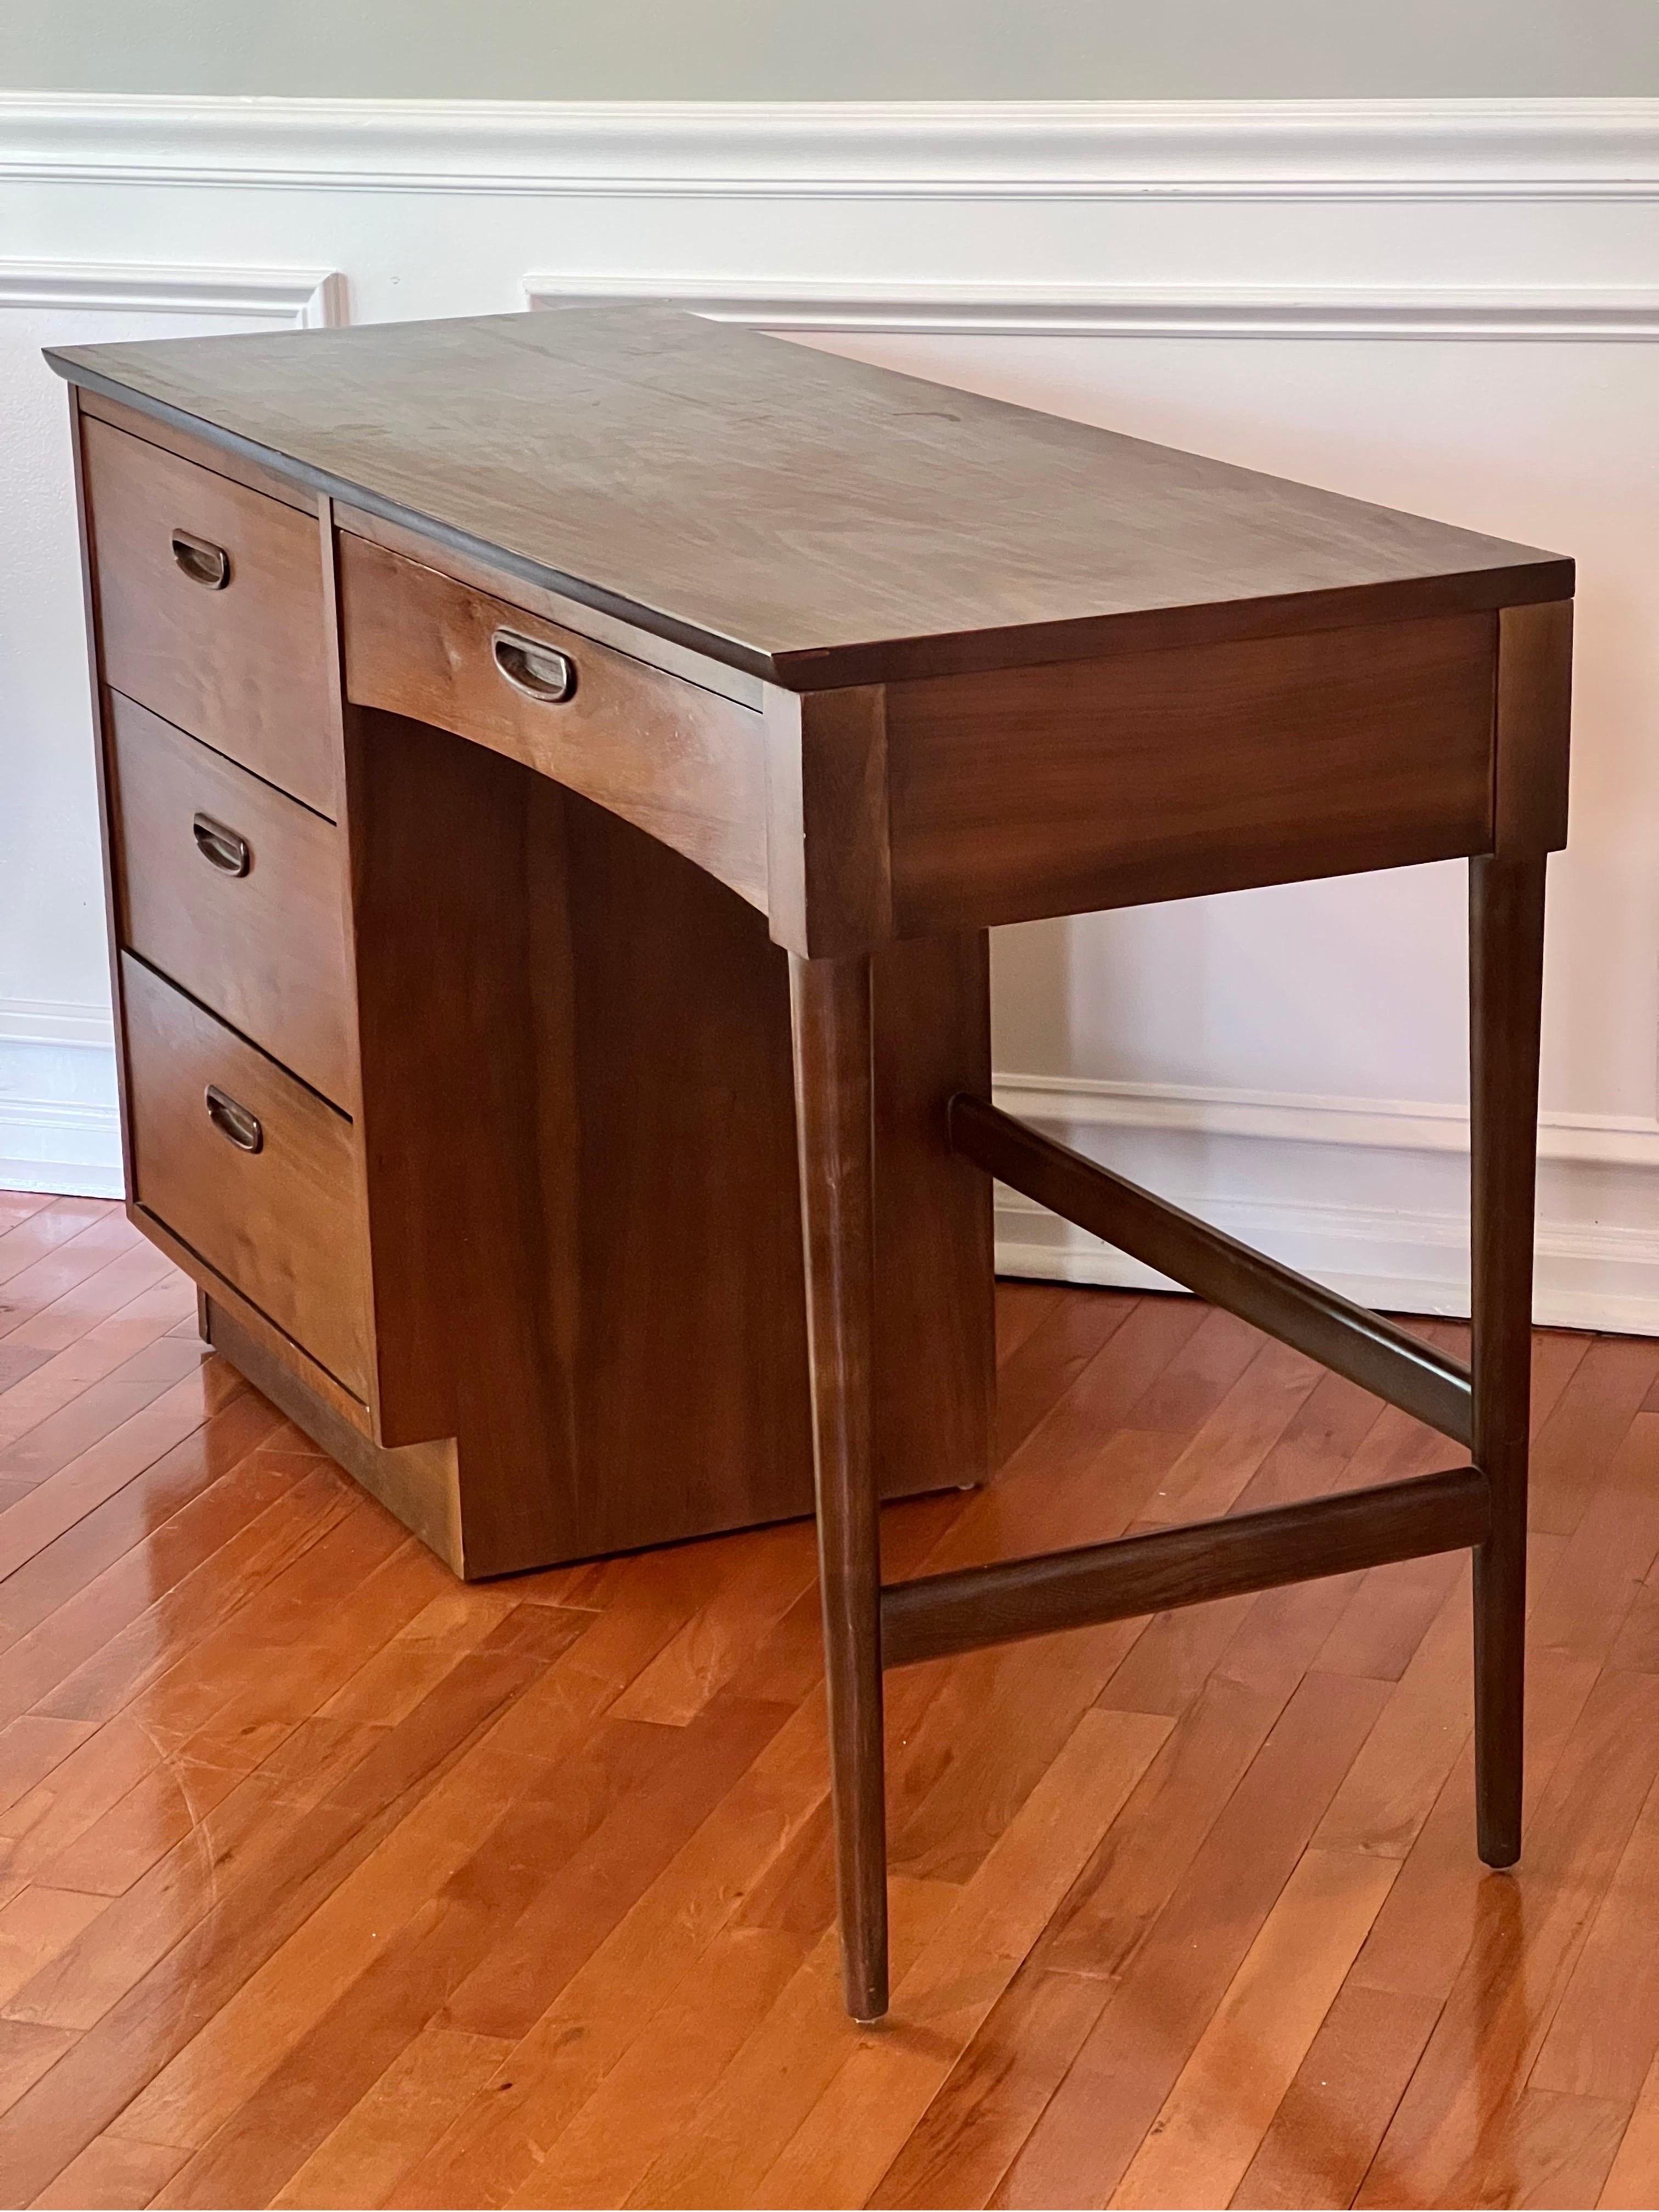 Beautiful vintage Lane Mid-Century Modern walnut desk. This piece features atomic tapered legs, laminate top and large dovetail drawers with ample storage. A classic and elegant addition to your modern home office.